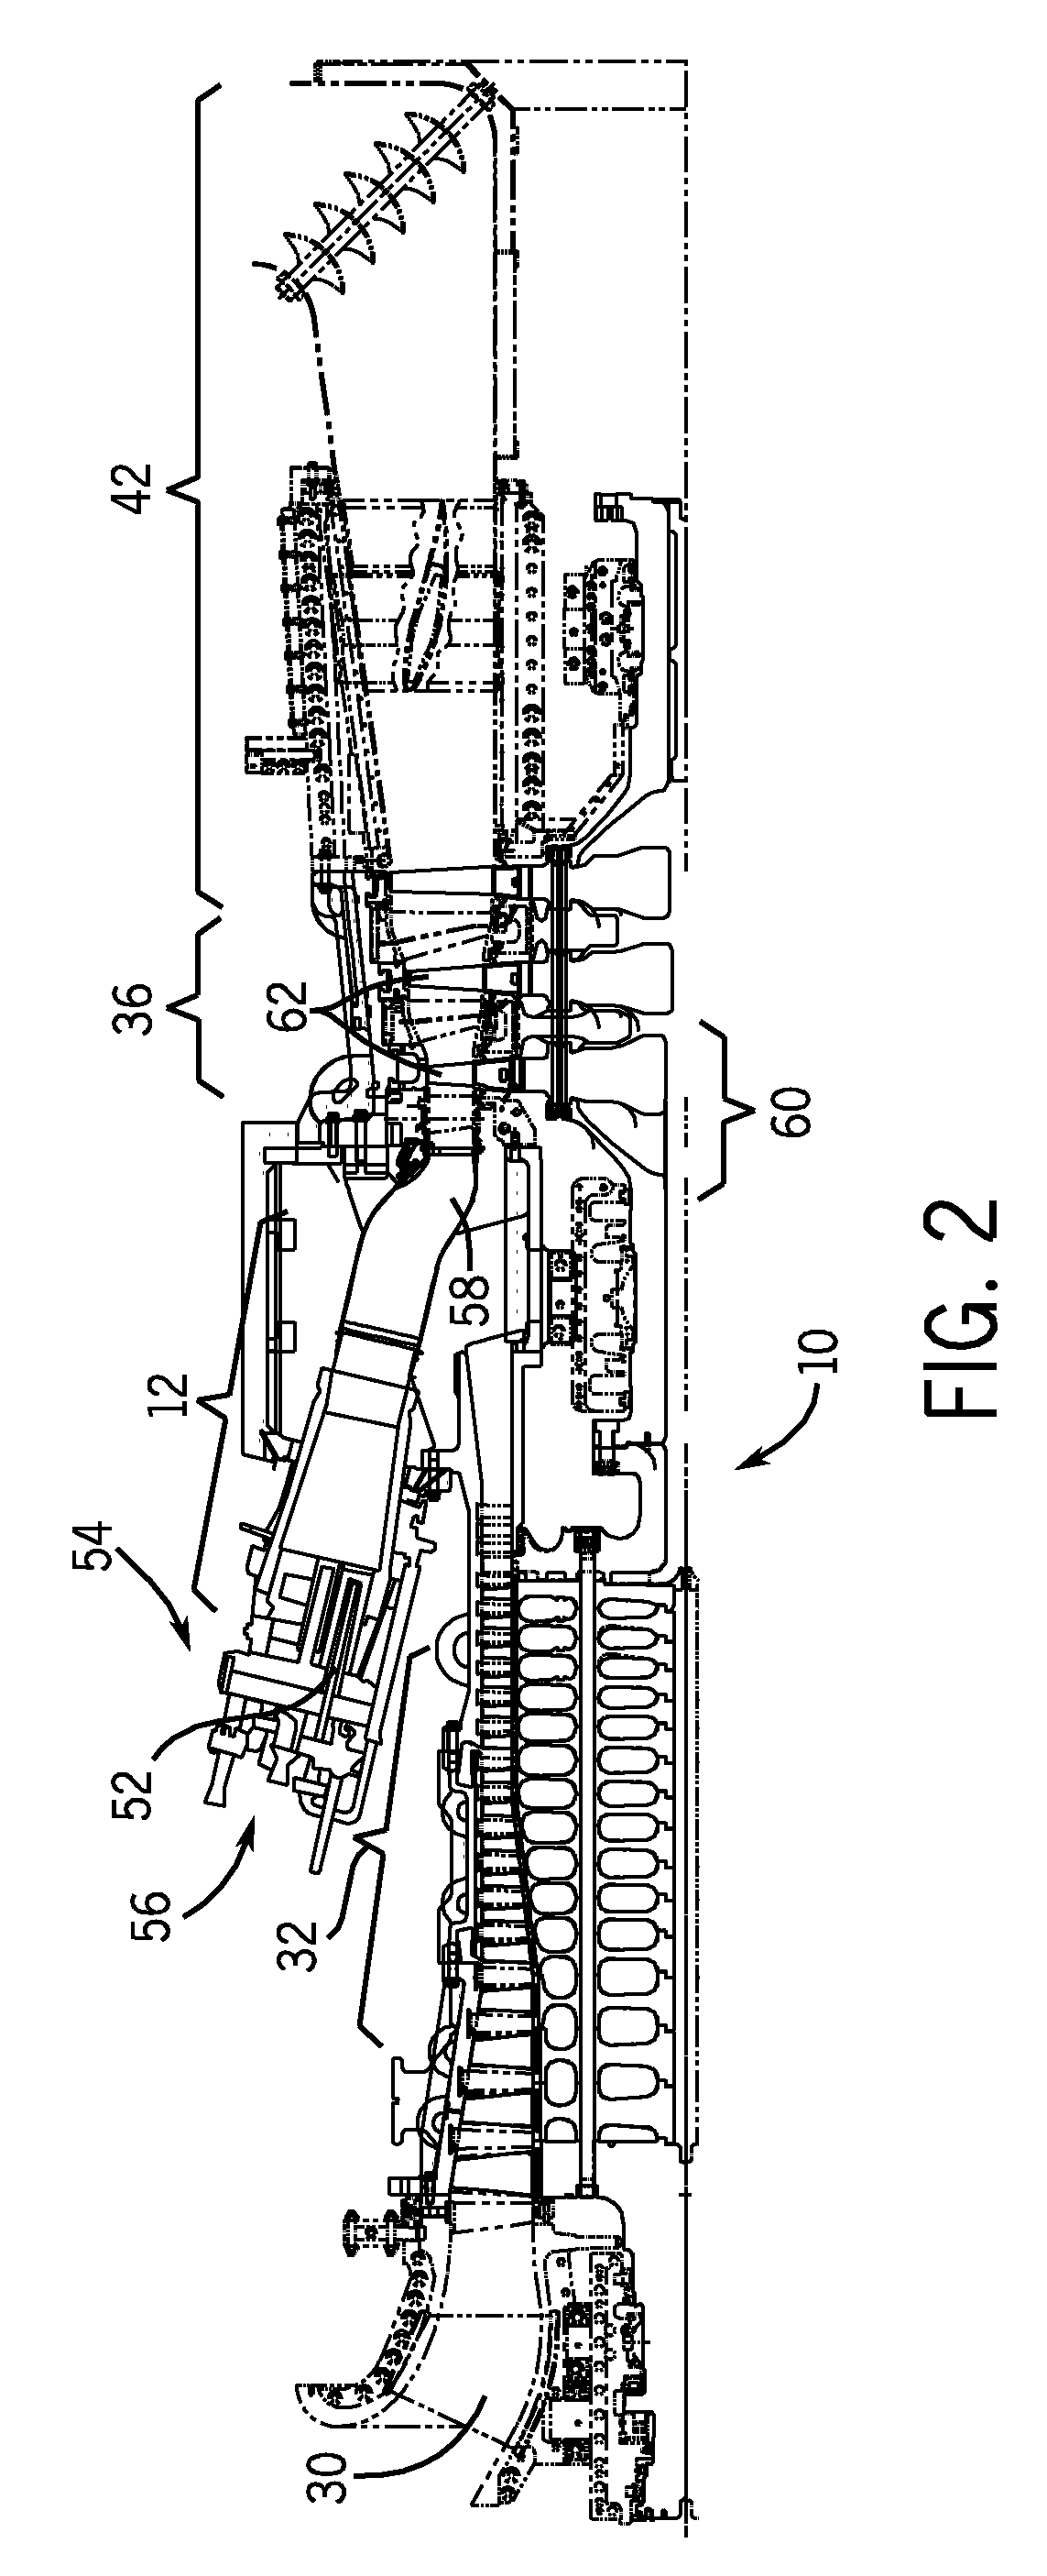 Methods and systems for inducing combustion dynamics